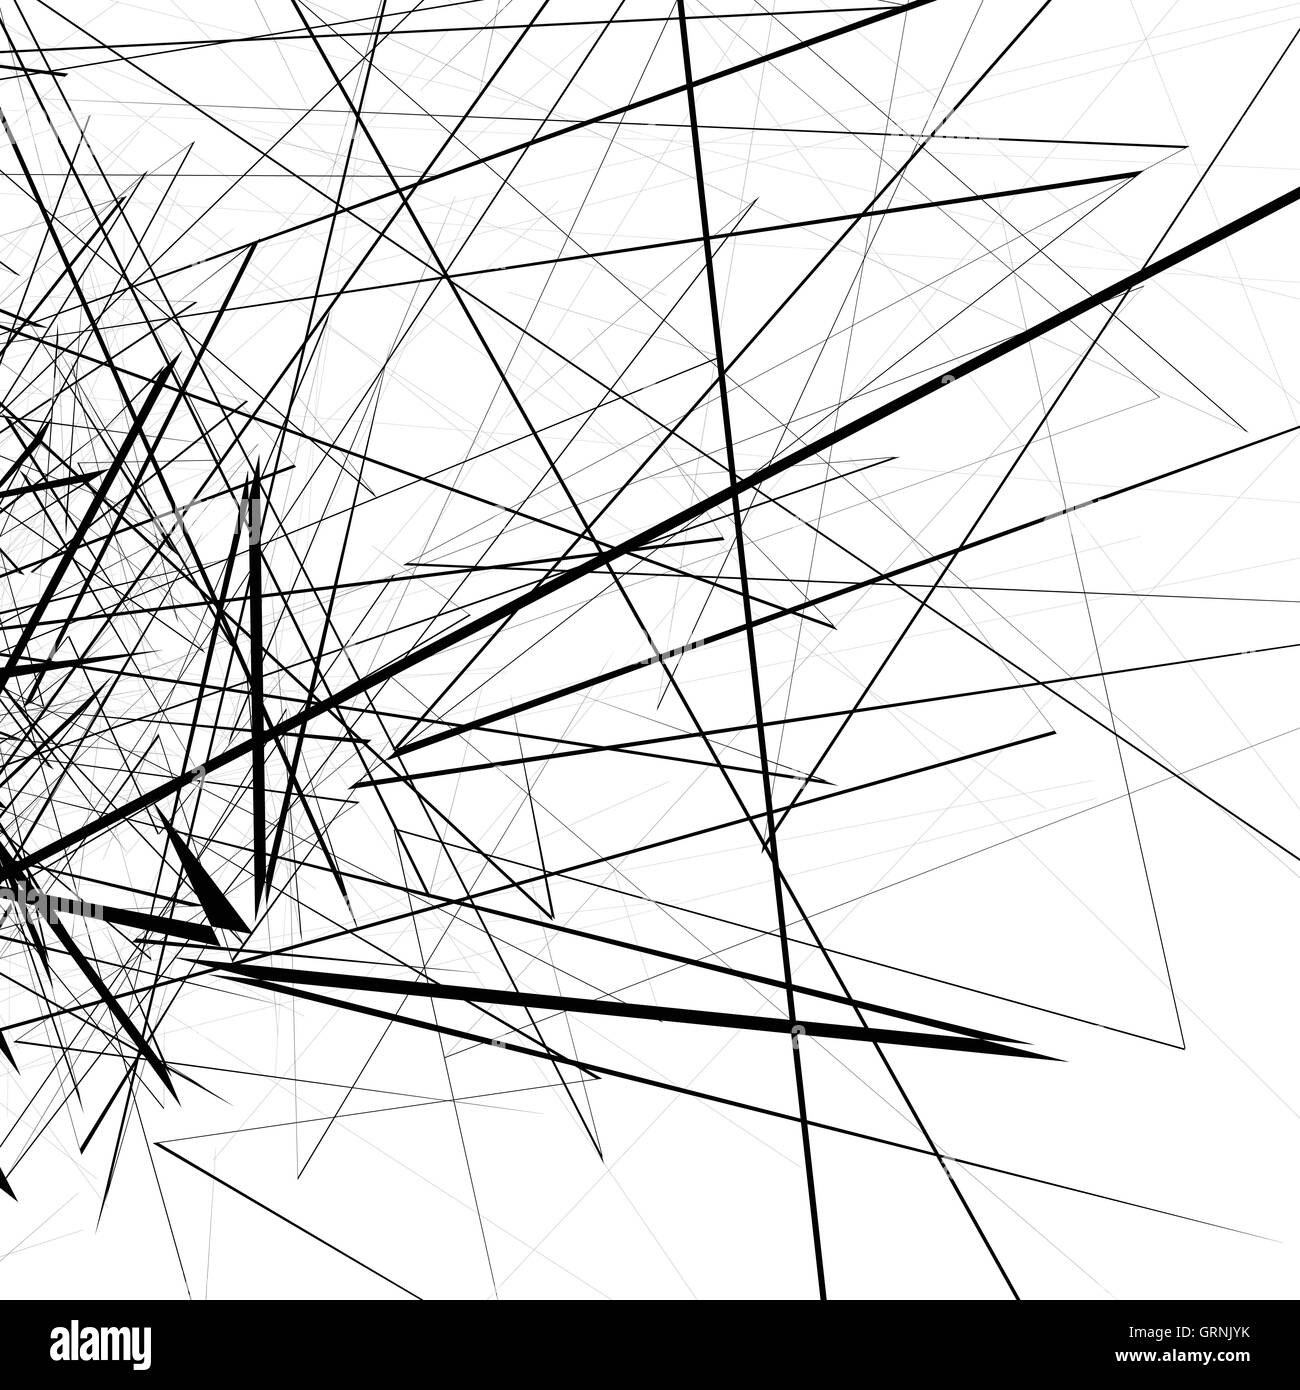 Scratchy Lines Vector Stock Photos & Scratchy Lines Vector Stock Images ...